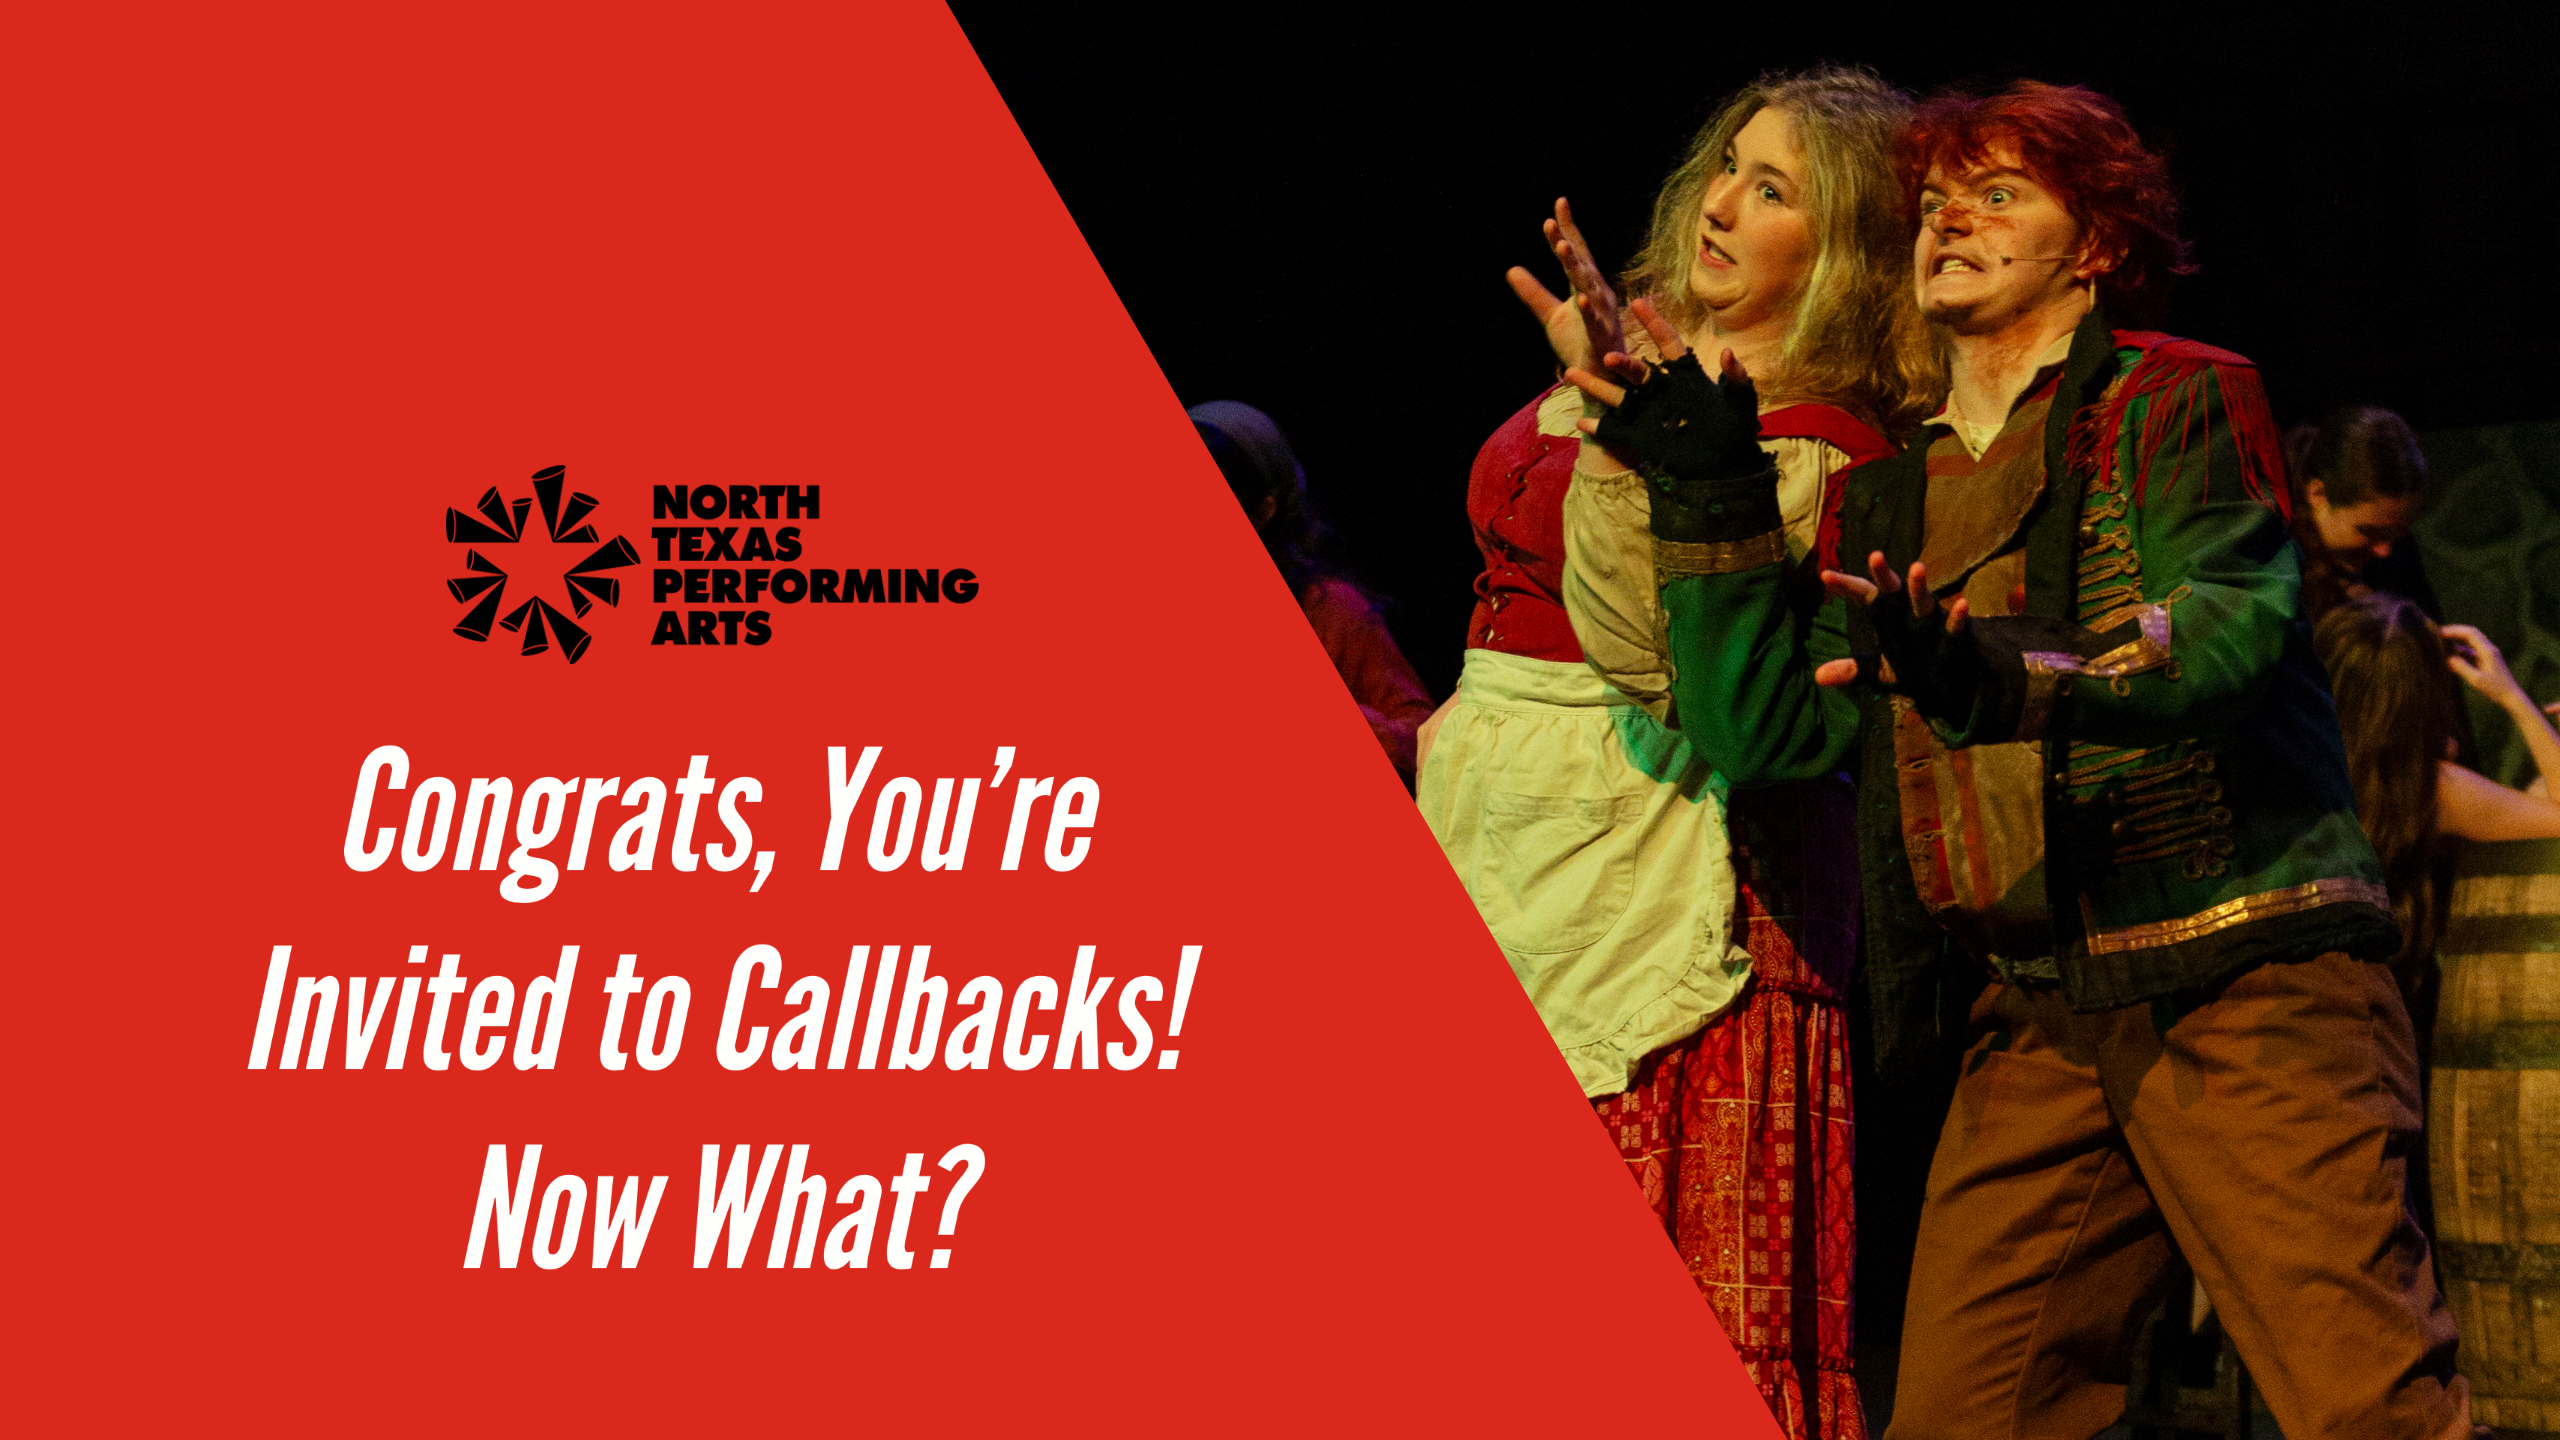 Congrats, You're Invited to Callbacks! Now What? - Blog Article by Paige Price